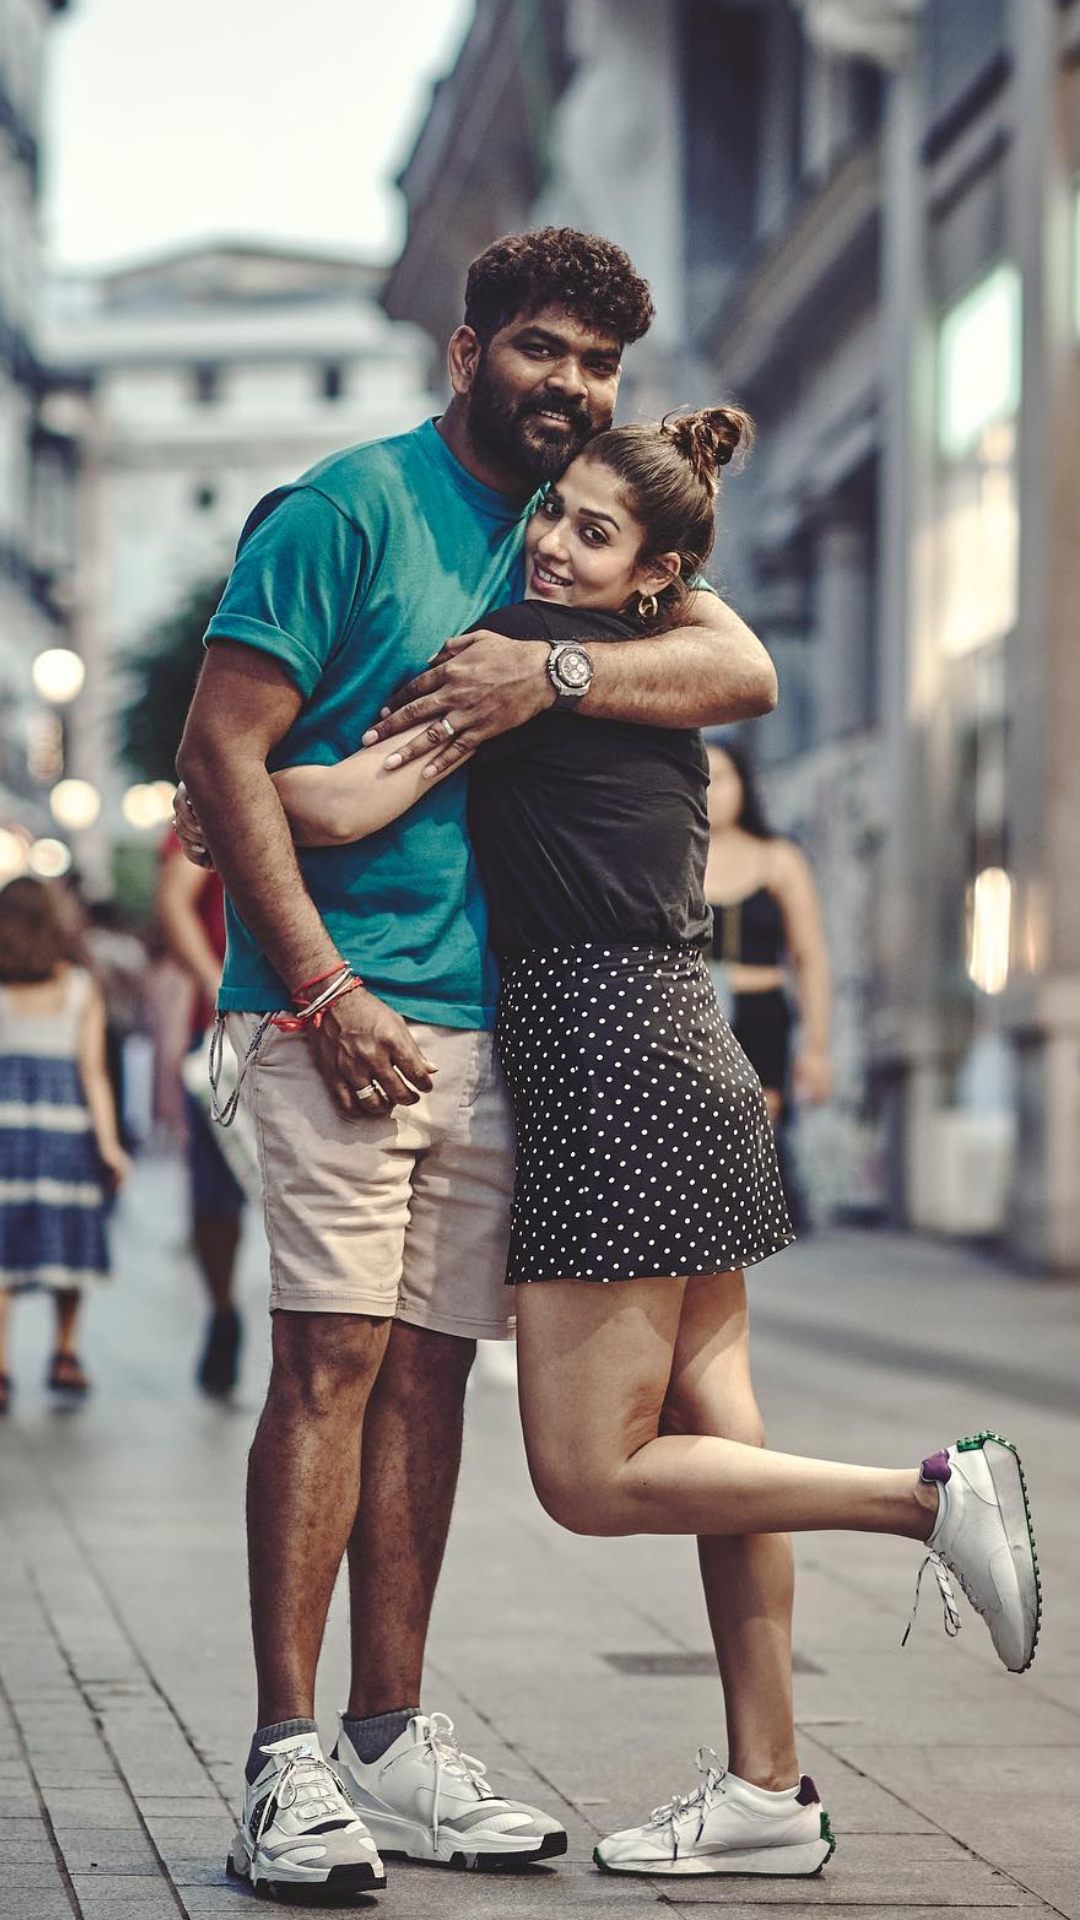 This Photographer Asks Elderly Couples To Pose For Engagement-Style Photos  | HuffPost Life